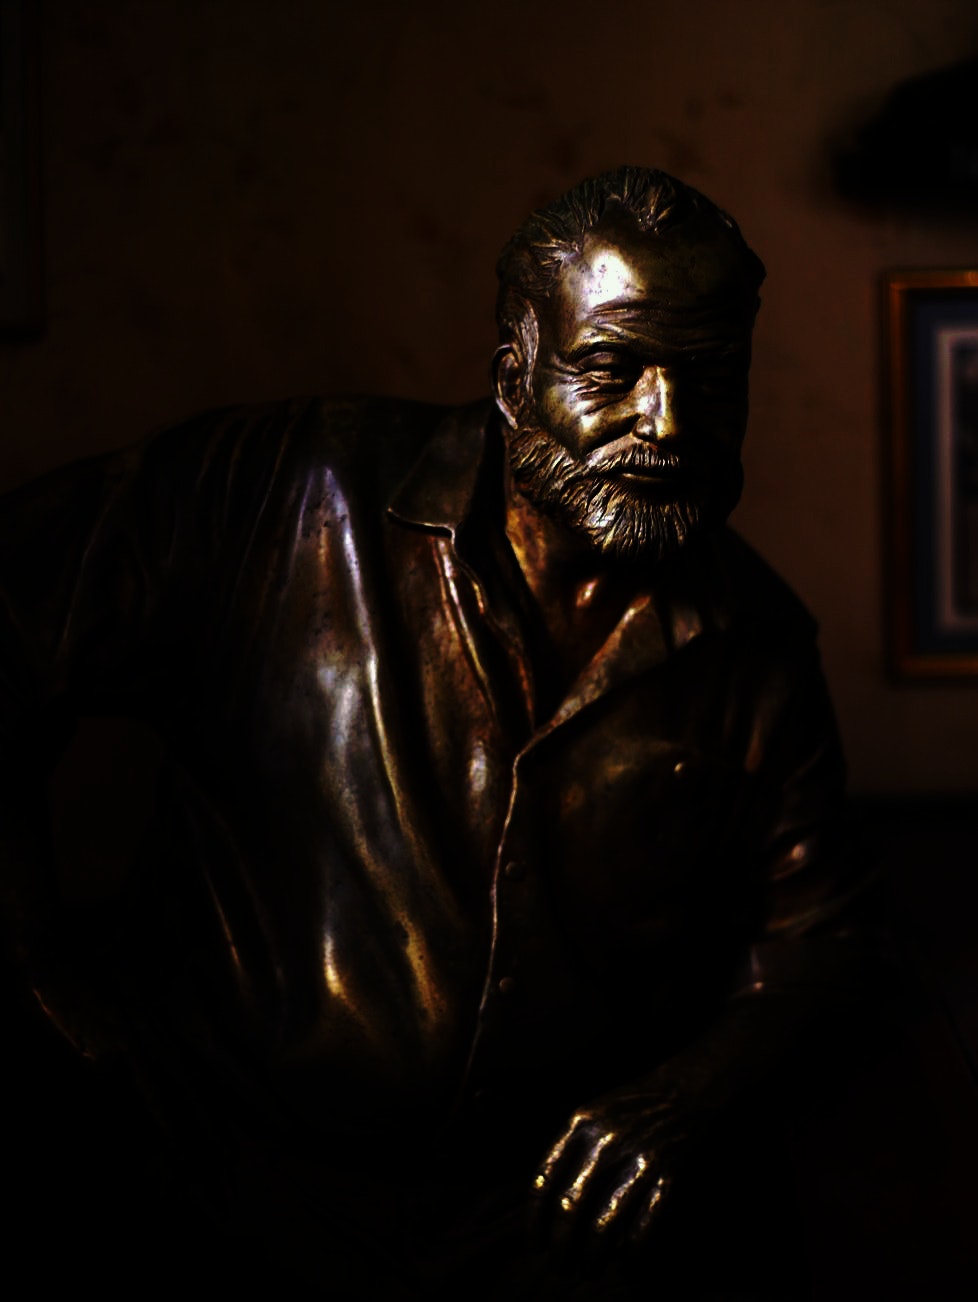 A statue of Hemingway leaning against the bar as if ordering another drink